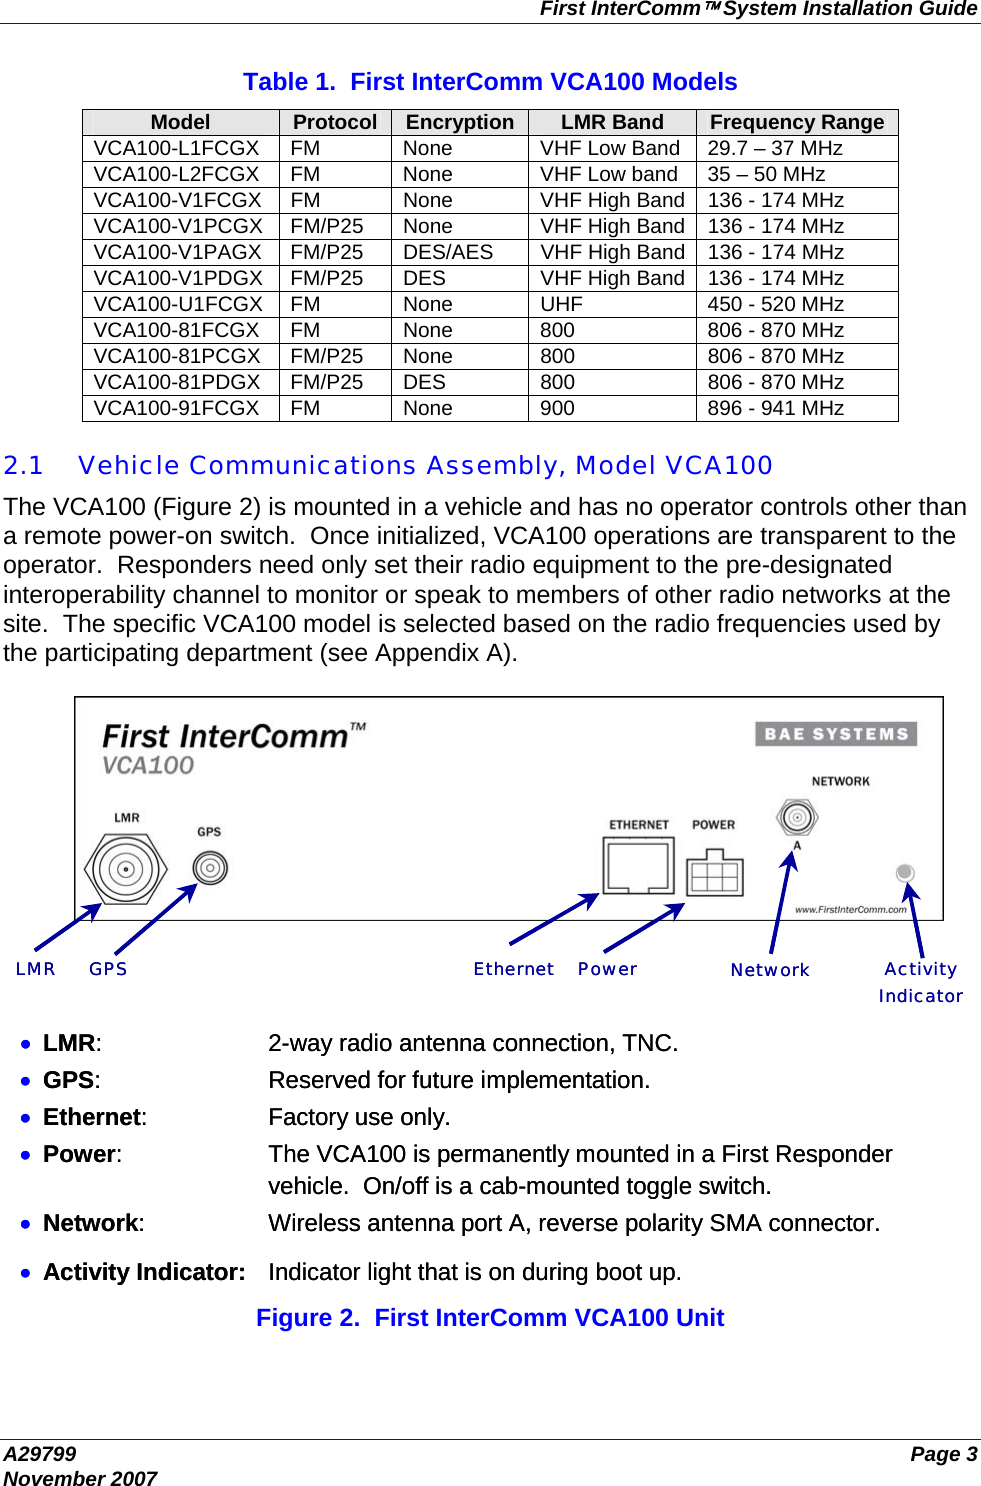 First InterComm™ System Installation Guide A29799  Page 3 November 2007  Table 1.  First InterComm VCA100 Models Model  Protocol  Encryption  LMR Band  Frequency Range VCA100-L1FCGX  FM  None  VHF Low Band  29.7 – 37 MHz VCA100-L2FCGX  FM  None  VHF Low band   35 – 50 MHz VCA100-V1FCGX  FM  None  VHF High Band 136 - 174 MHz VCA100-V1PCGX  FM/P25  None  VHF High Band 136 - 174 MHz VCA100-V1PAGX  FM/P25  DES/AES  VHF High Band 136 - 174 MHz VCA100-V1PDGX  FM/P25  DES  VHF High Band 136 - 174 MHz VCA100-U1FCGX  FM  None  UHF  450 - 520 MHz VCA100-81FCGX  FM  None  800  806 - 870 MHz VCA100-81PCGX  FM/P25  None  800  806 - 870 MHz VCA100-81PDGX  FM/P25  DES  800  806 - 870 MHz VCA100-91FCGX  FM  None  900  896 - 941 MHz  2.1 Vehicle Communications Assembly, Model VCA100  The VCA100 (Figure 2) is mounted in a vehicle and has no operator controls other than a remote power-on switch.  Once initialized, VCA100 operations are transparent to the operator.  Responders need only set their radio equipment to the pre-designated interoperability channel to monitor or speak to members of other radio networks at the site.  The specific VCA100 model is selected based on the radio frequencies used by the participating department (see Appendix A).  •LMR: 2-way radio antenna connection, TNC.•GPS: Reserved for future implementation.•Ethernet: Factory use only.•Power: The VCA100 is permanently mounted in a First Responder vehicle.  On/off is a cab-mounted toggle switch.•Network: Wireless antenna port A, reverse polarity SMA connector.•Activity Indicator: Indicator light that is on during boot up.Ethernet ActivityIndicatorPowerLMR GPS Network•LMR: 2-way radio antenna connection, TNC.•GPS: Reserved for future implementation.•Ethernet: Factory use only.•Power: The VCA100 is permanently mounted in a First Responder vehicle.  On/off is a cab-mounted toggle switch.•Network: Wireless antenna port A, reverse polarity SMA connector.•Activity Indicator: Indicator light that is on during boot up.Ethernet ActivityIndicatorPowerLMR GPS Network Figure 2.  First InterComm VCA100 Unit 